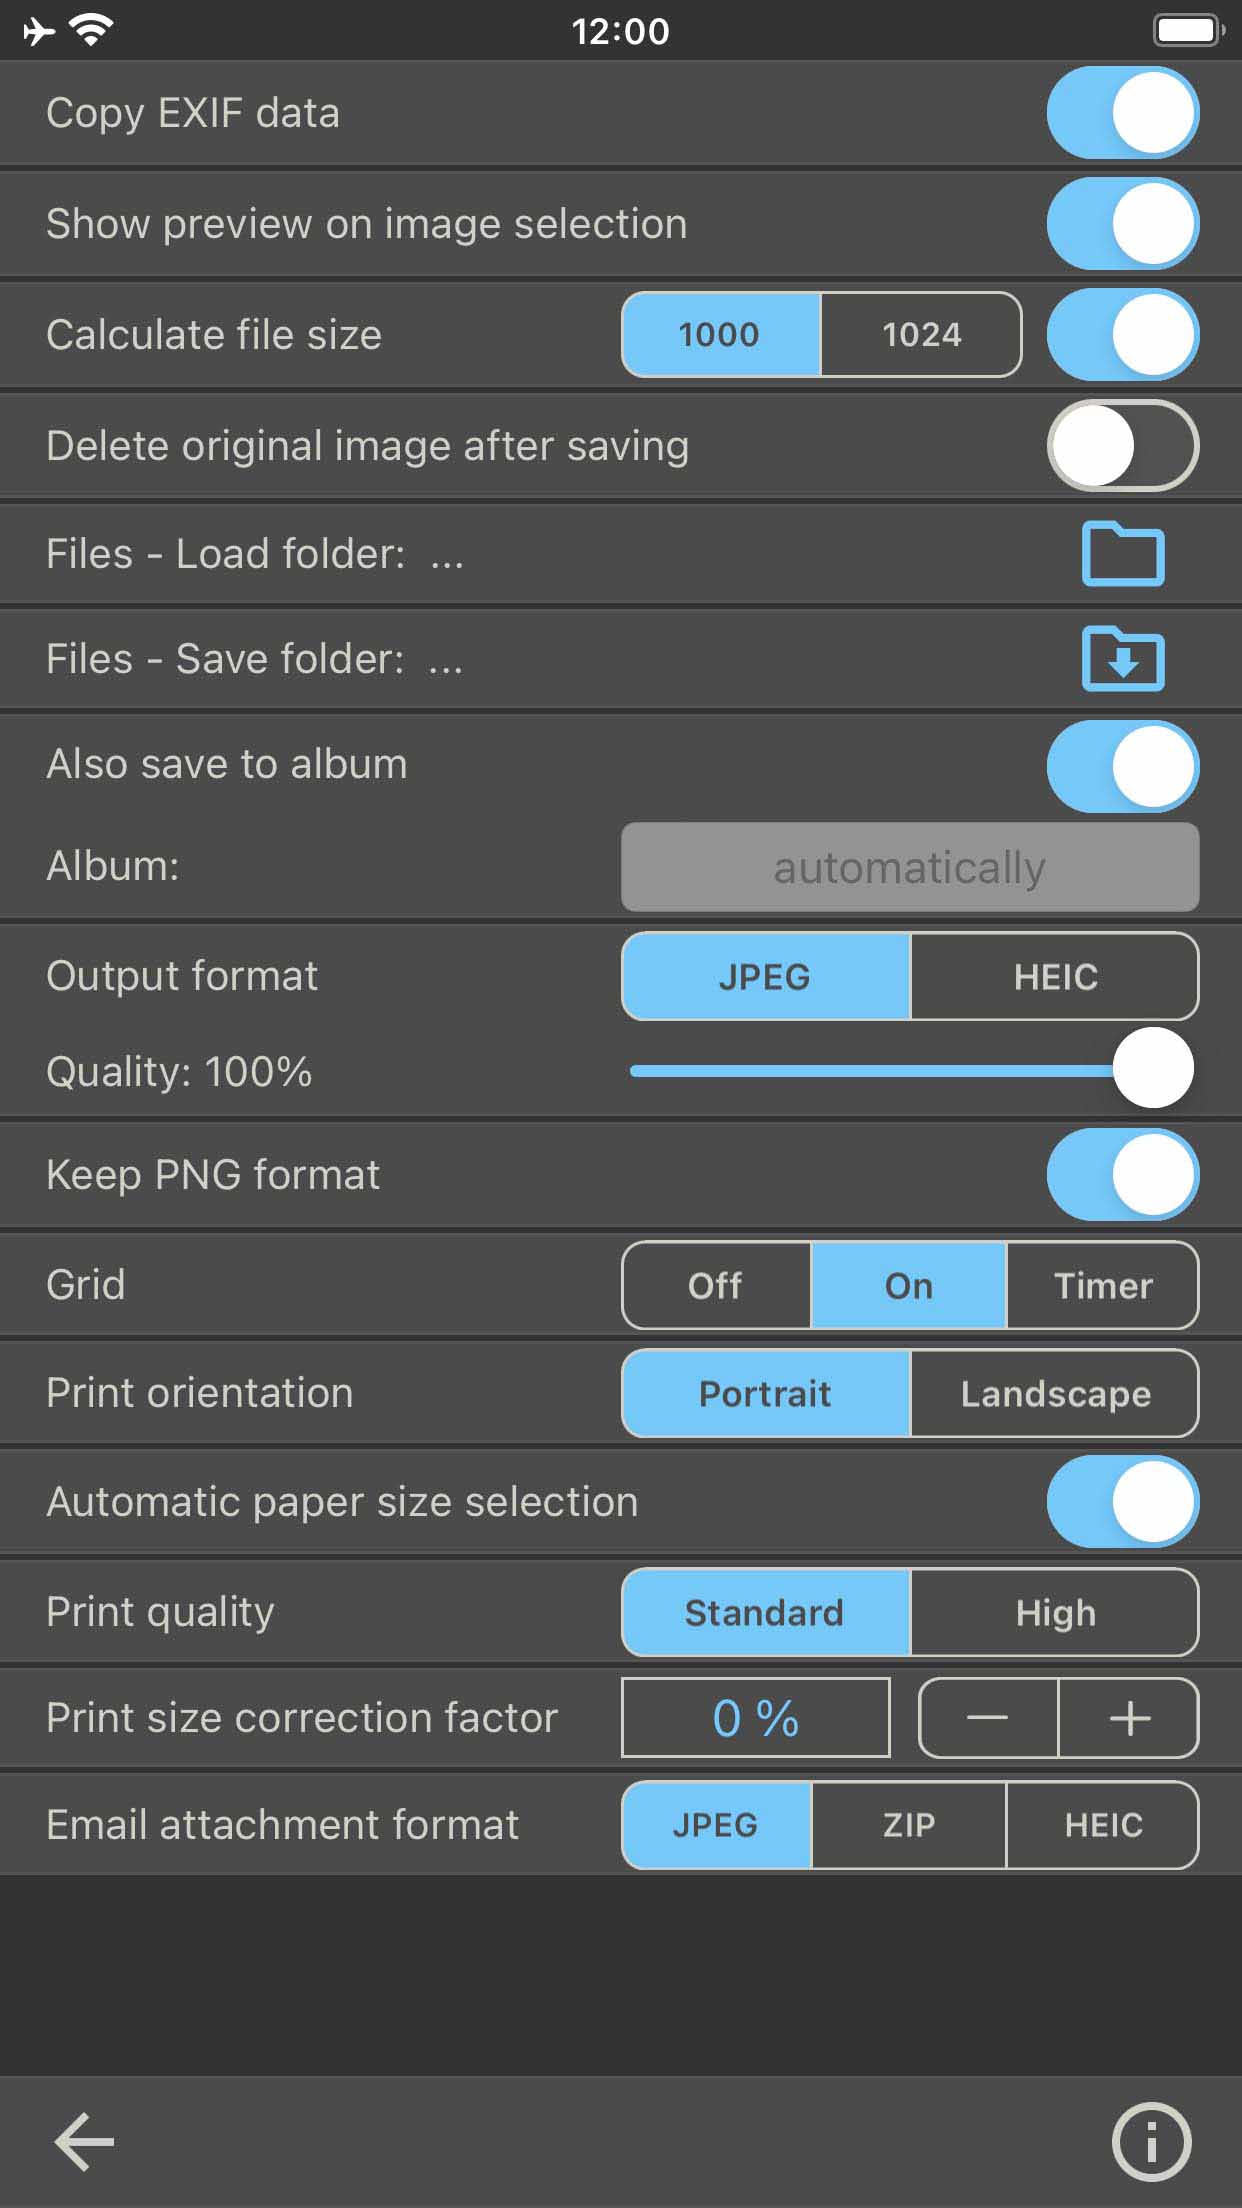 The settings of the Image Size app.